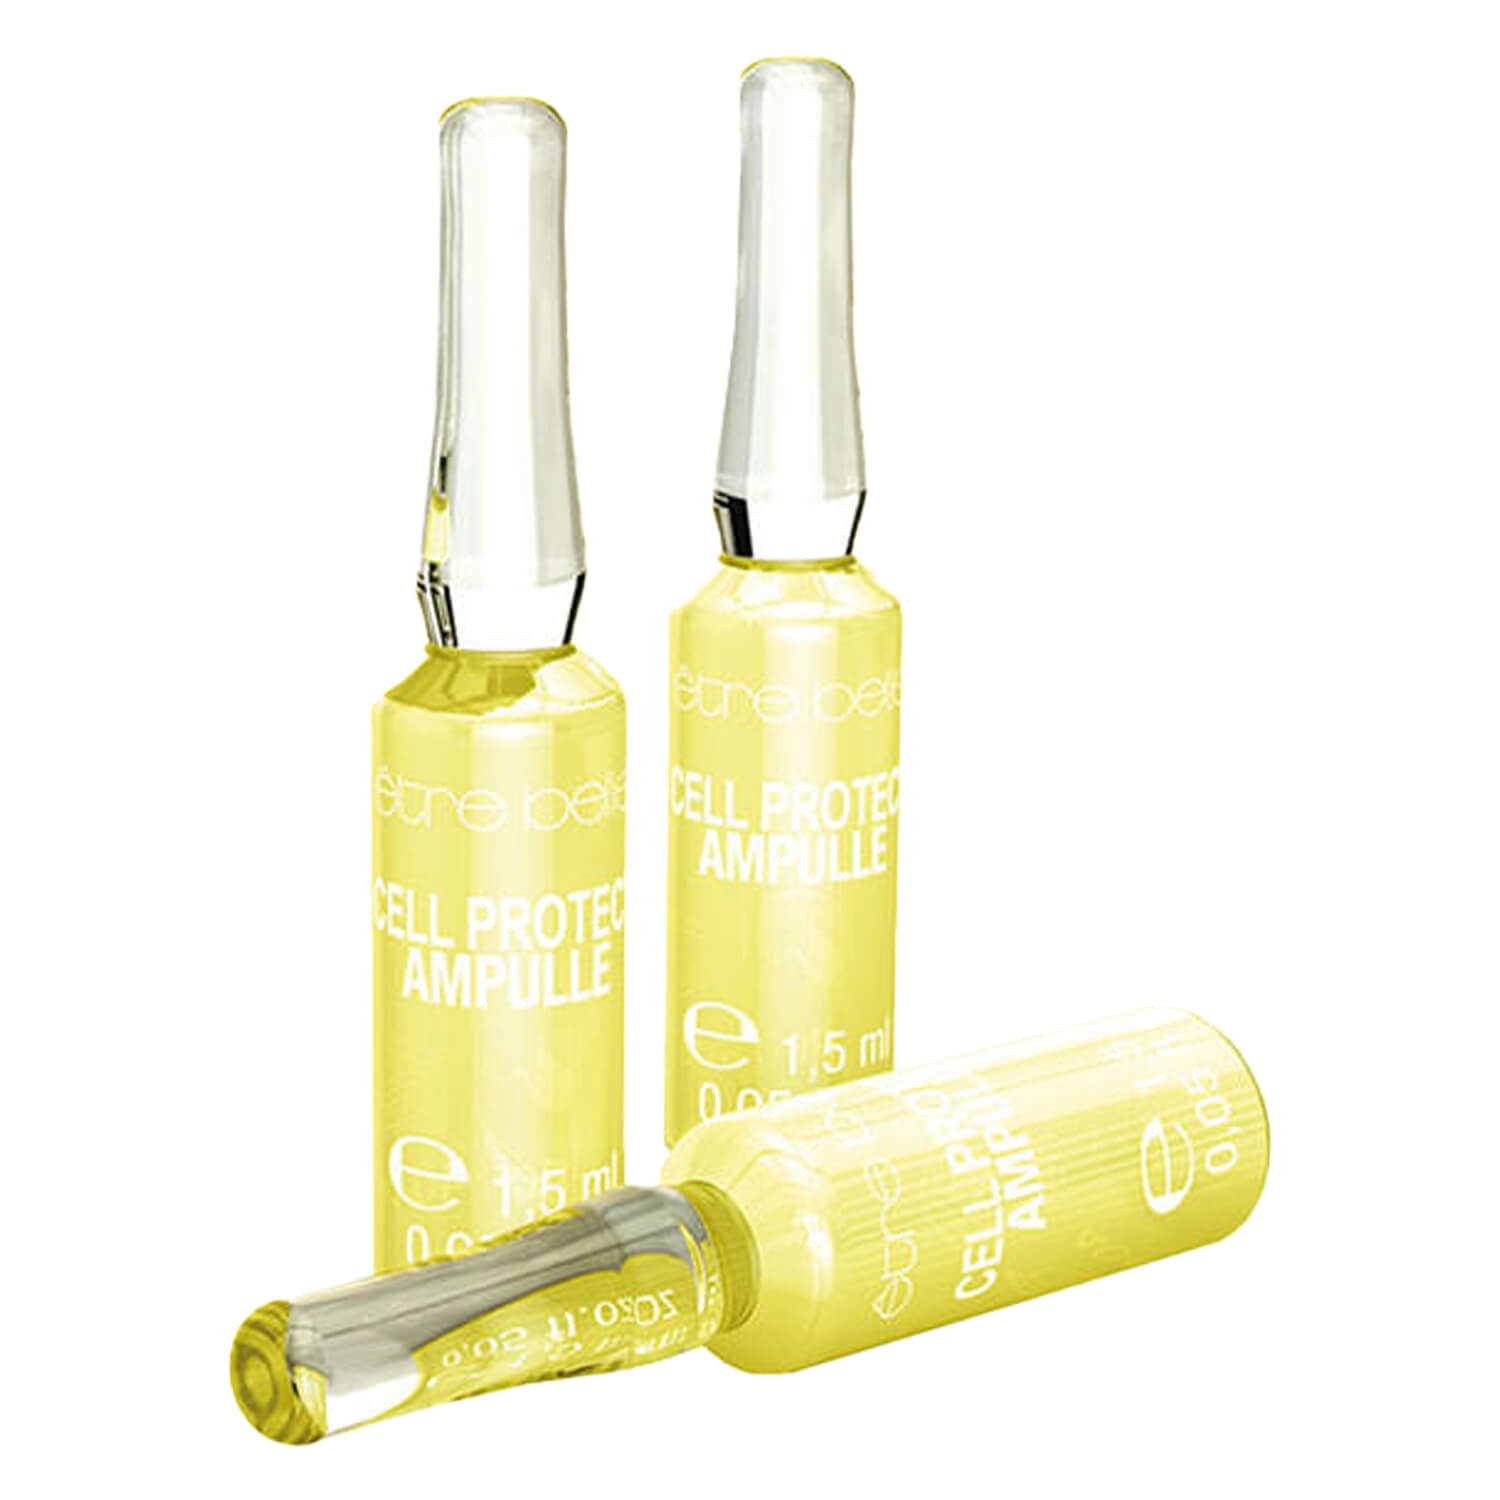 Product image from être belle - Cell Protect Ampullen